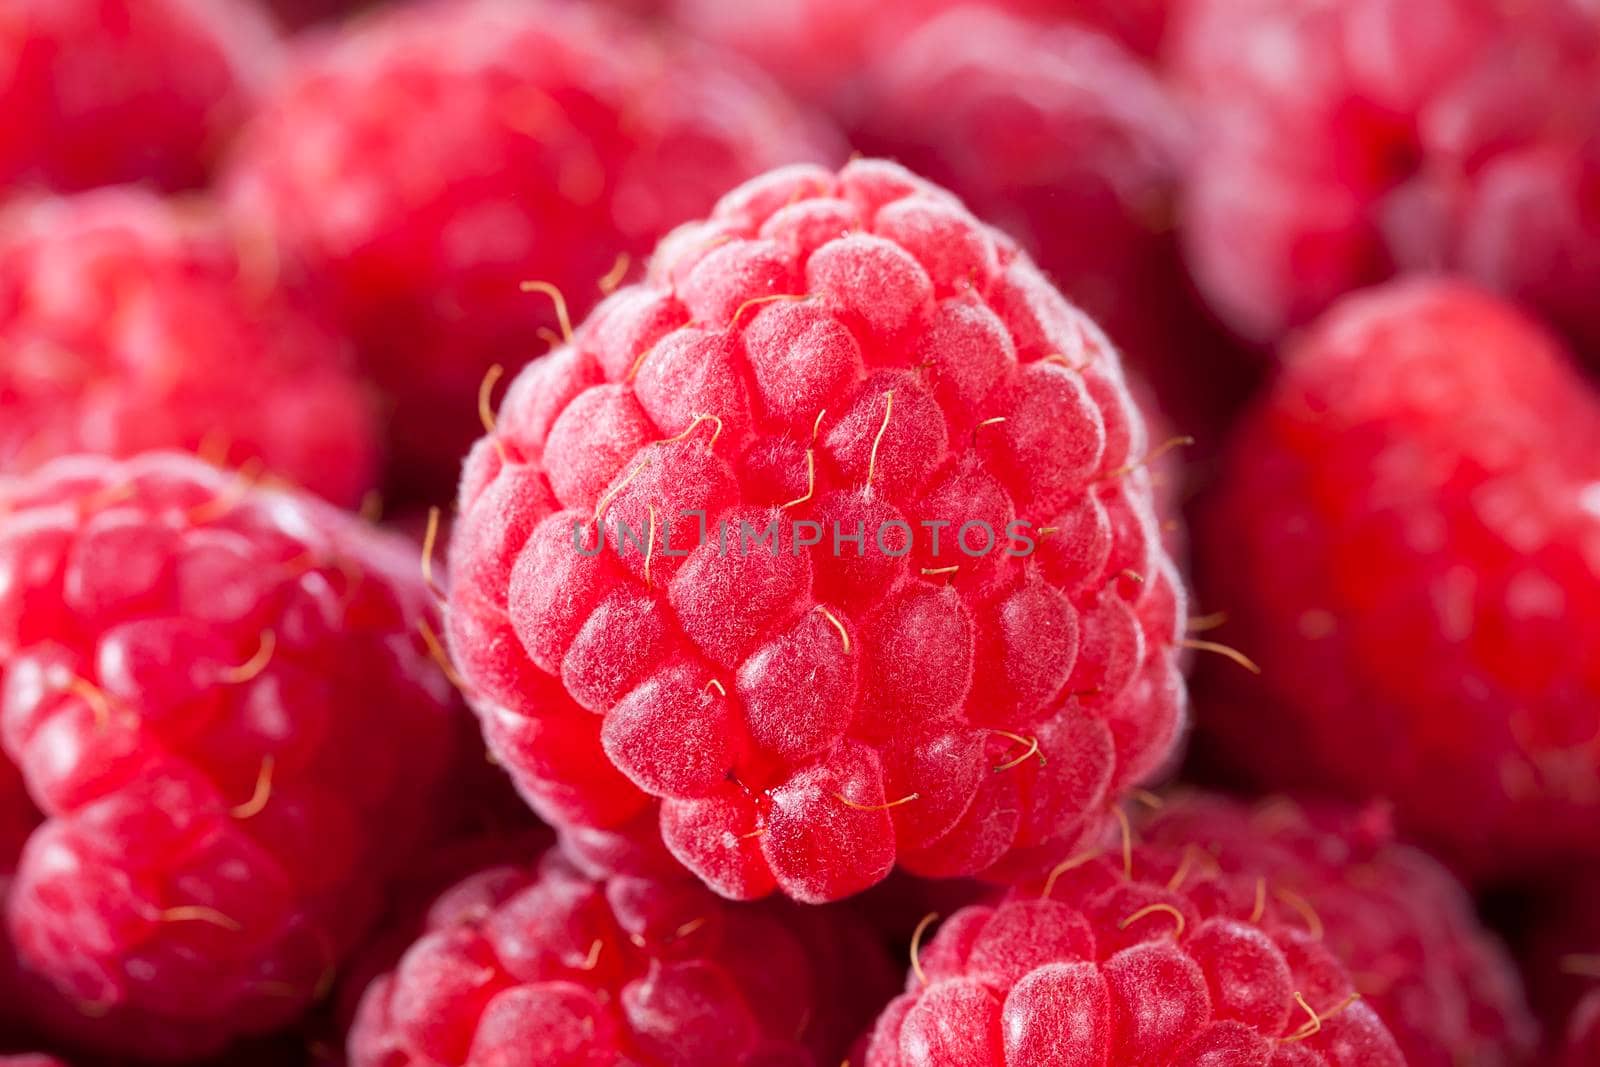 red raspberry harvest, ready for eating, closeup photo